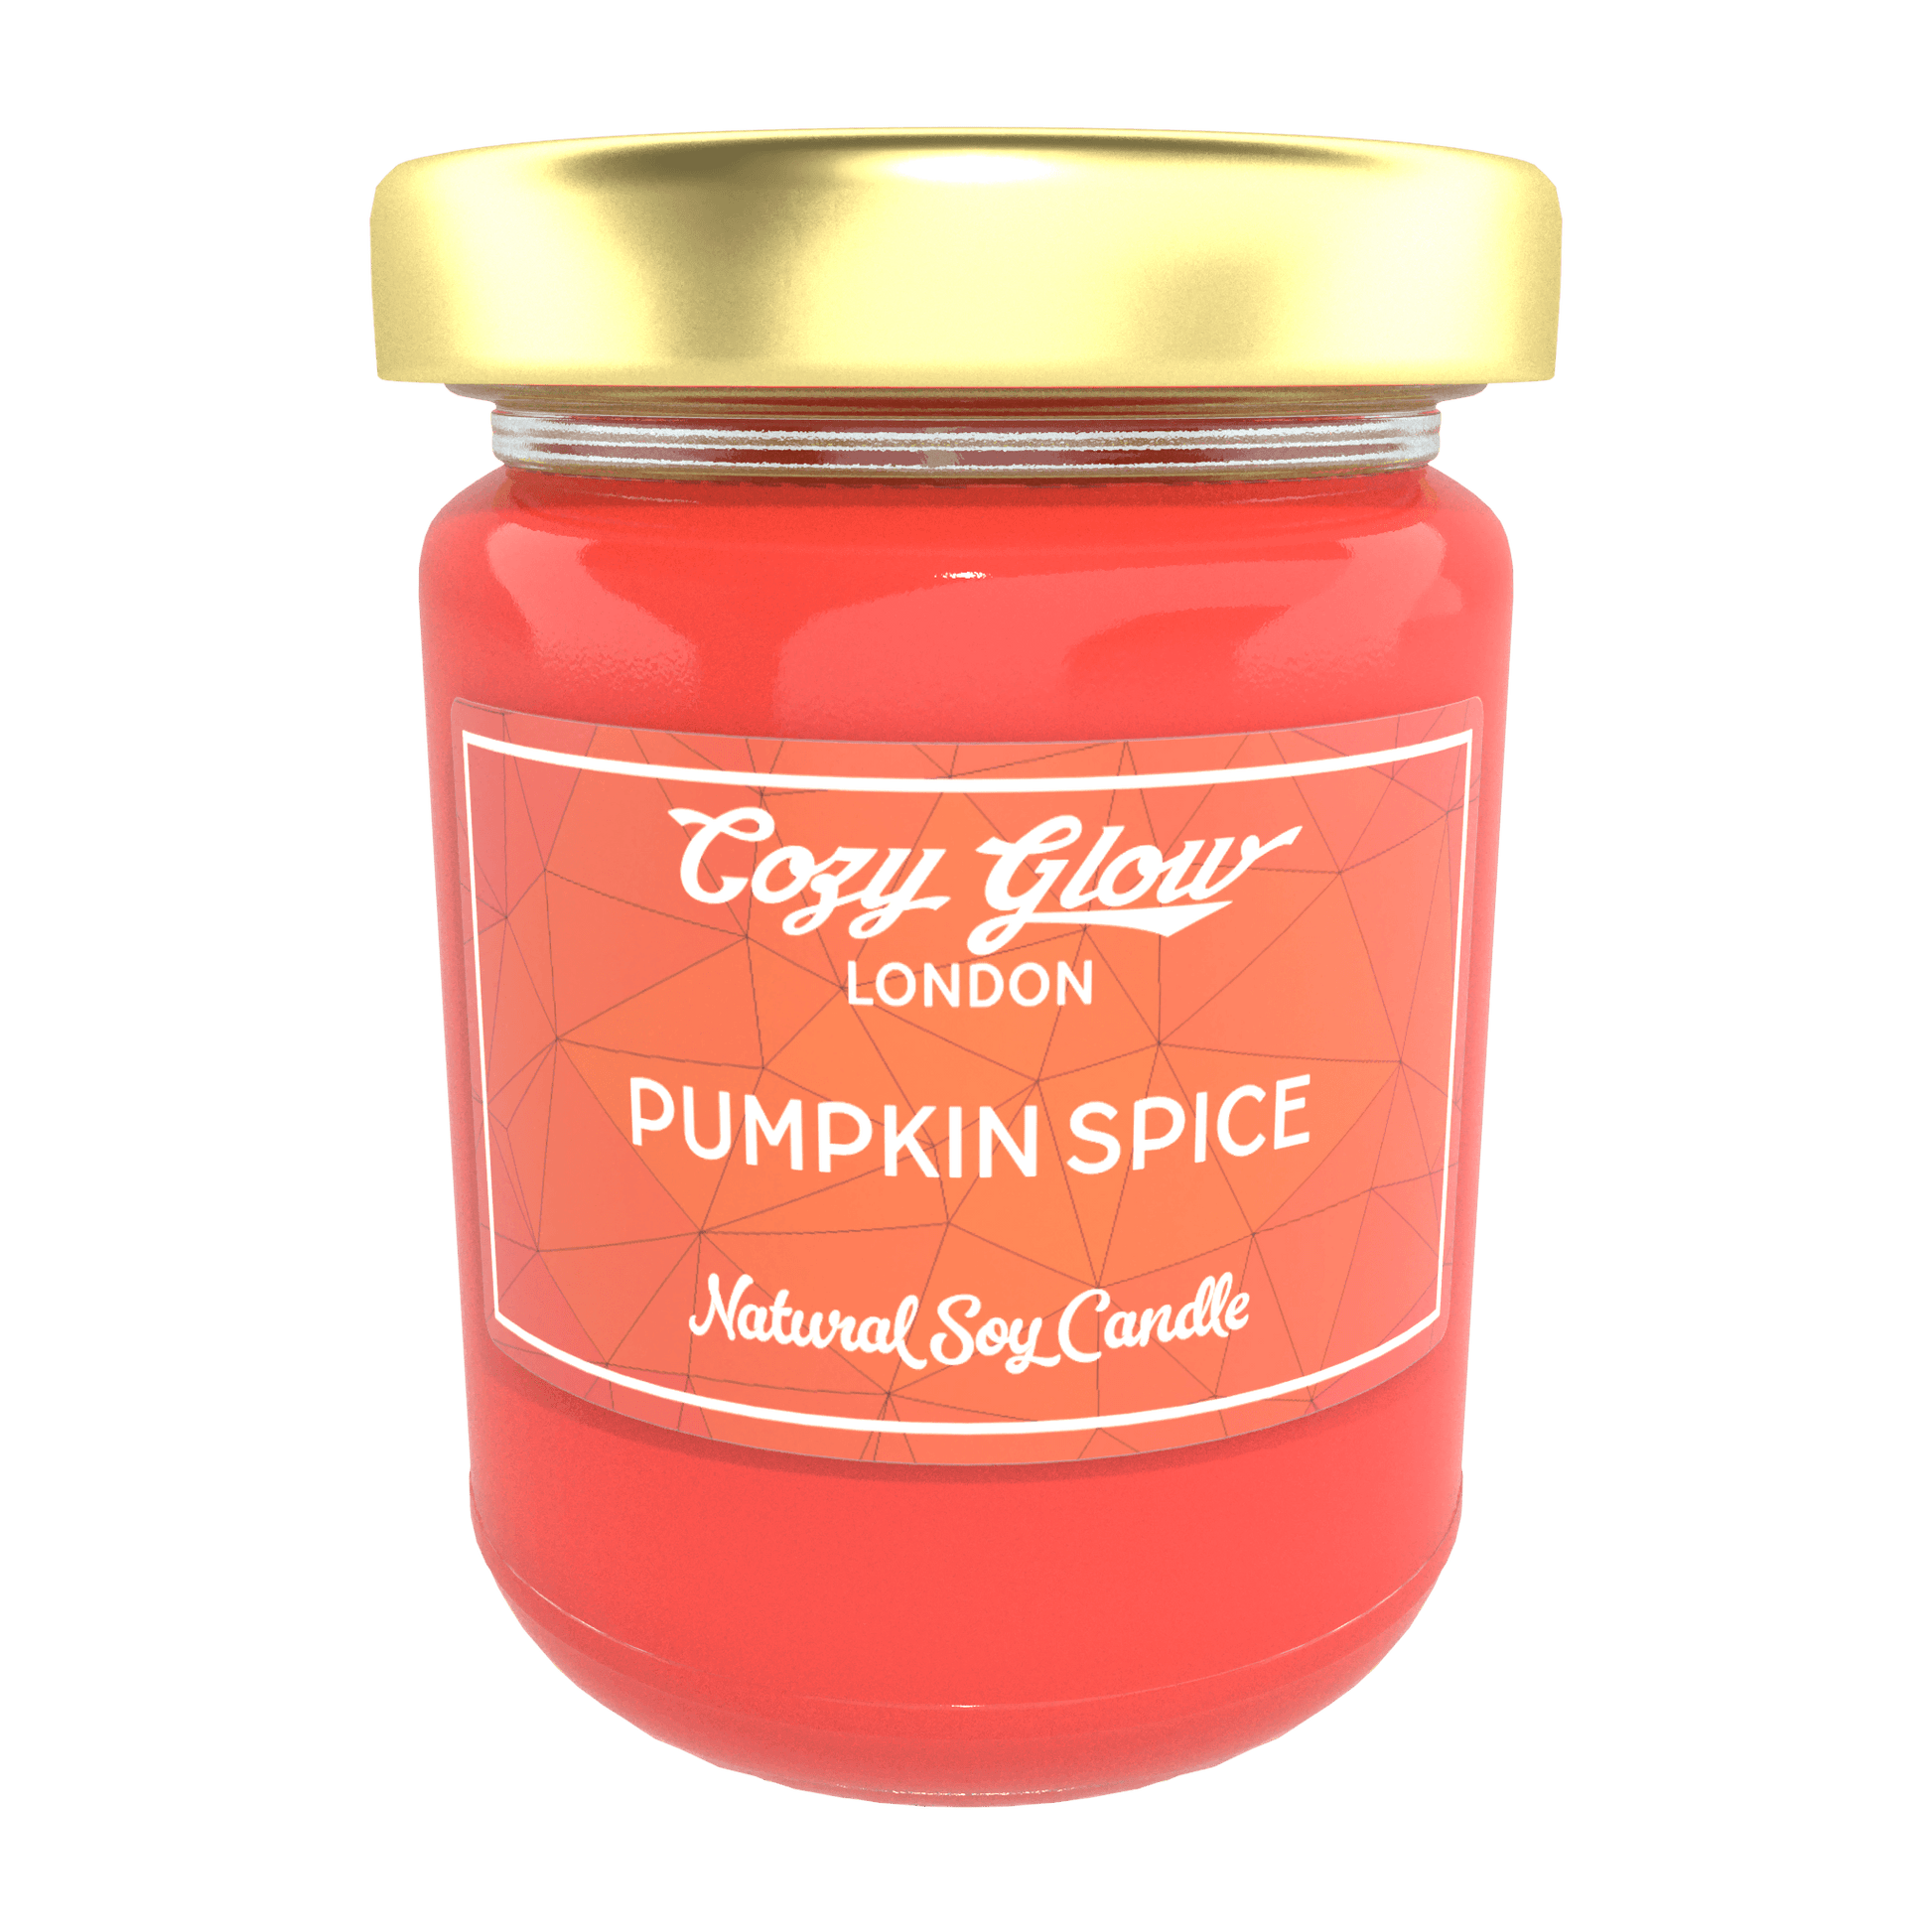 Cozy Glow Pumpkin Spice Large Soy Candle